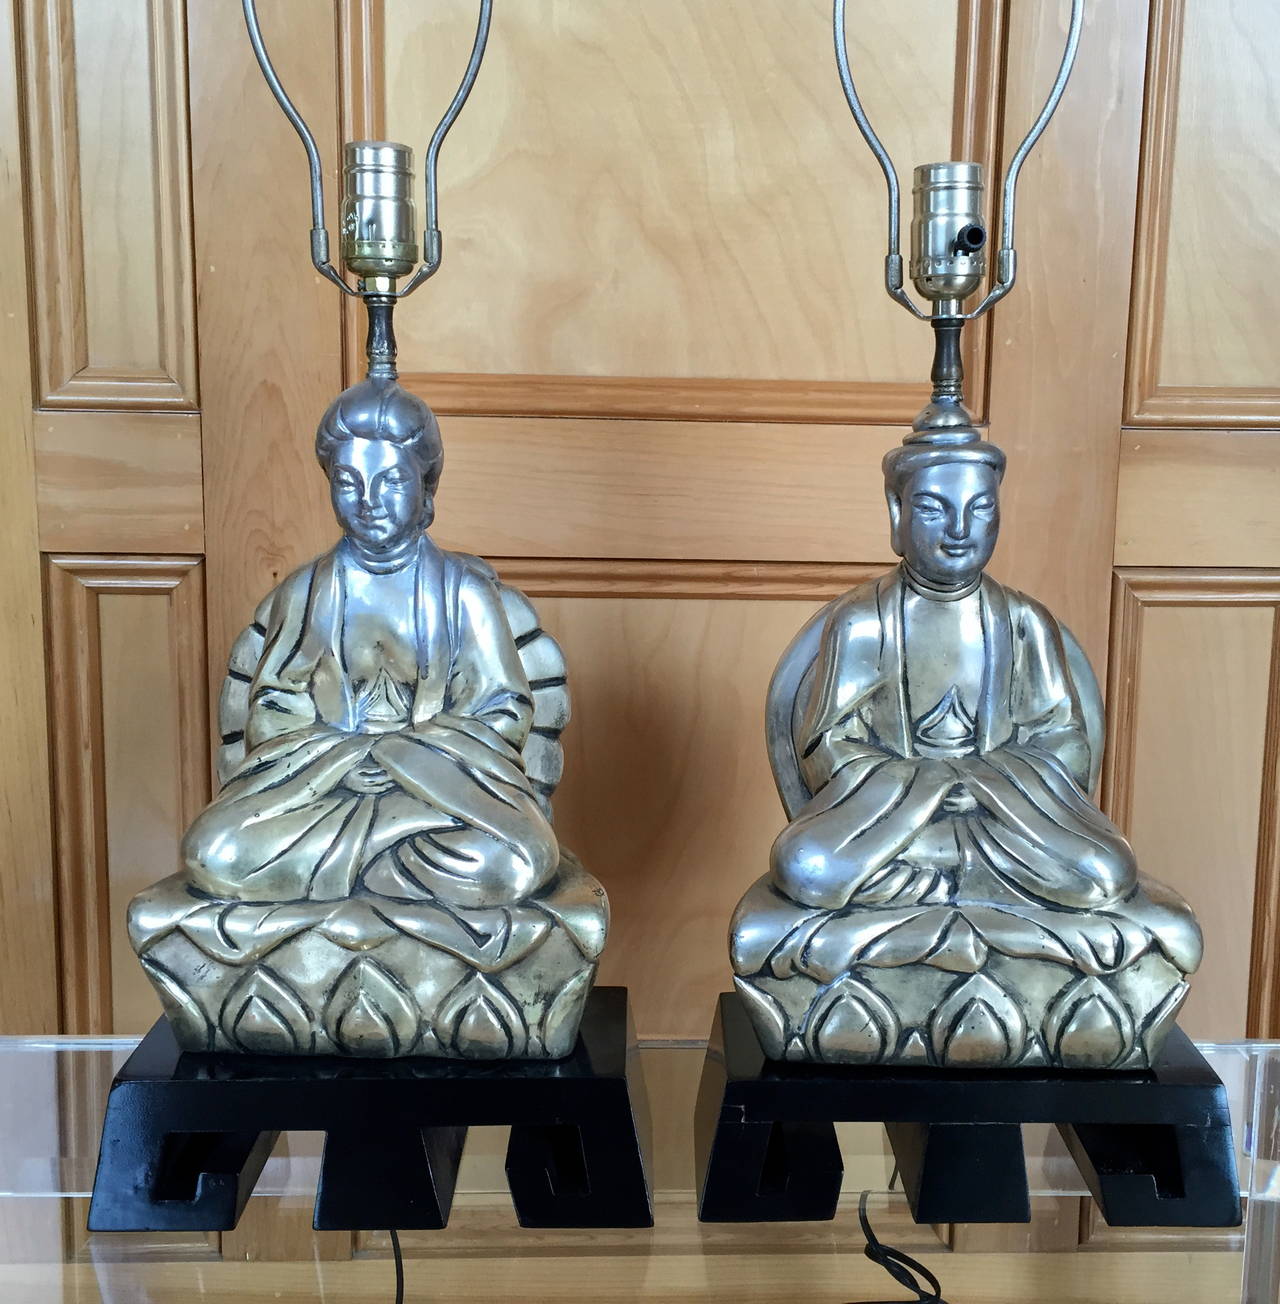 These 1950s stylized lamps of a Chinese man and woman wearing ceremonial robes, are in the style of the great James Mont. Elegantly realized, they also have endearing countenances and are finely detailed. Cast of silvered metal, they sit on the